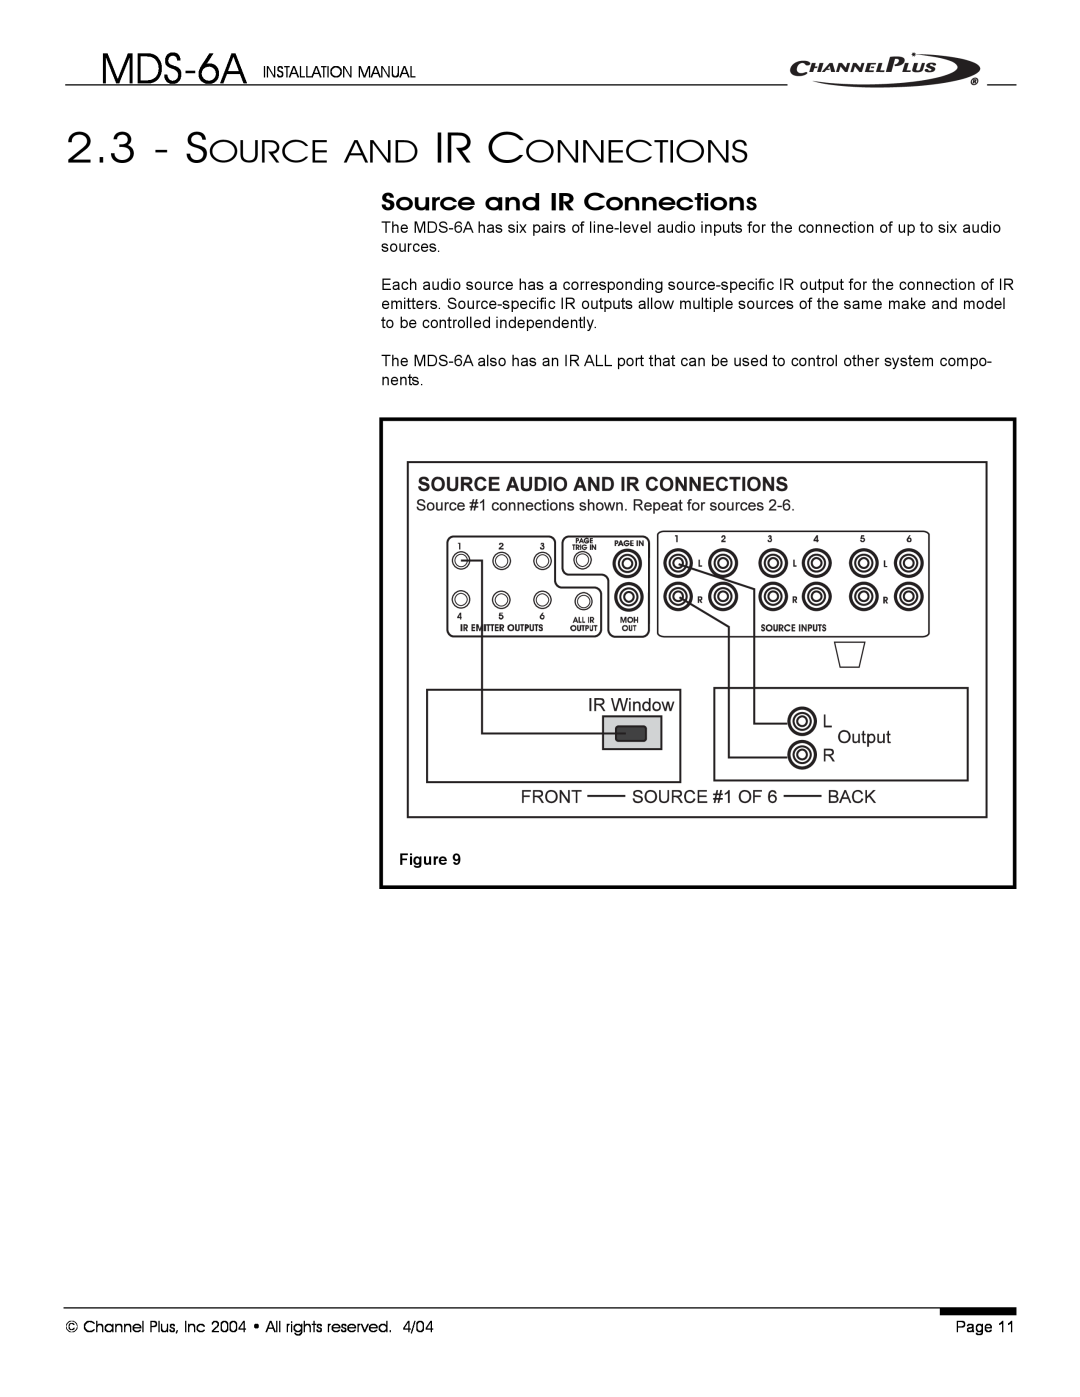 Channel Plus MDS-6A installation manual Source And Ir Connections, Source and IR Connections 